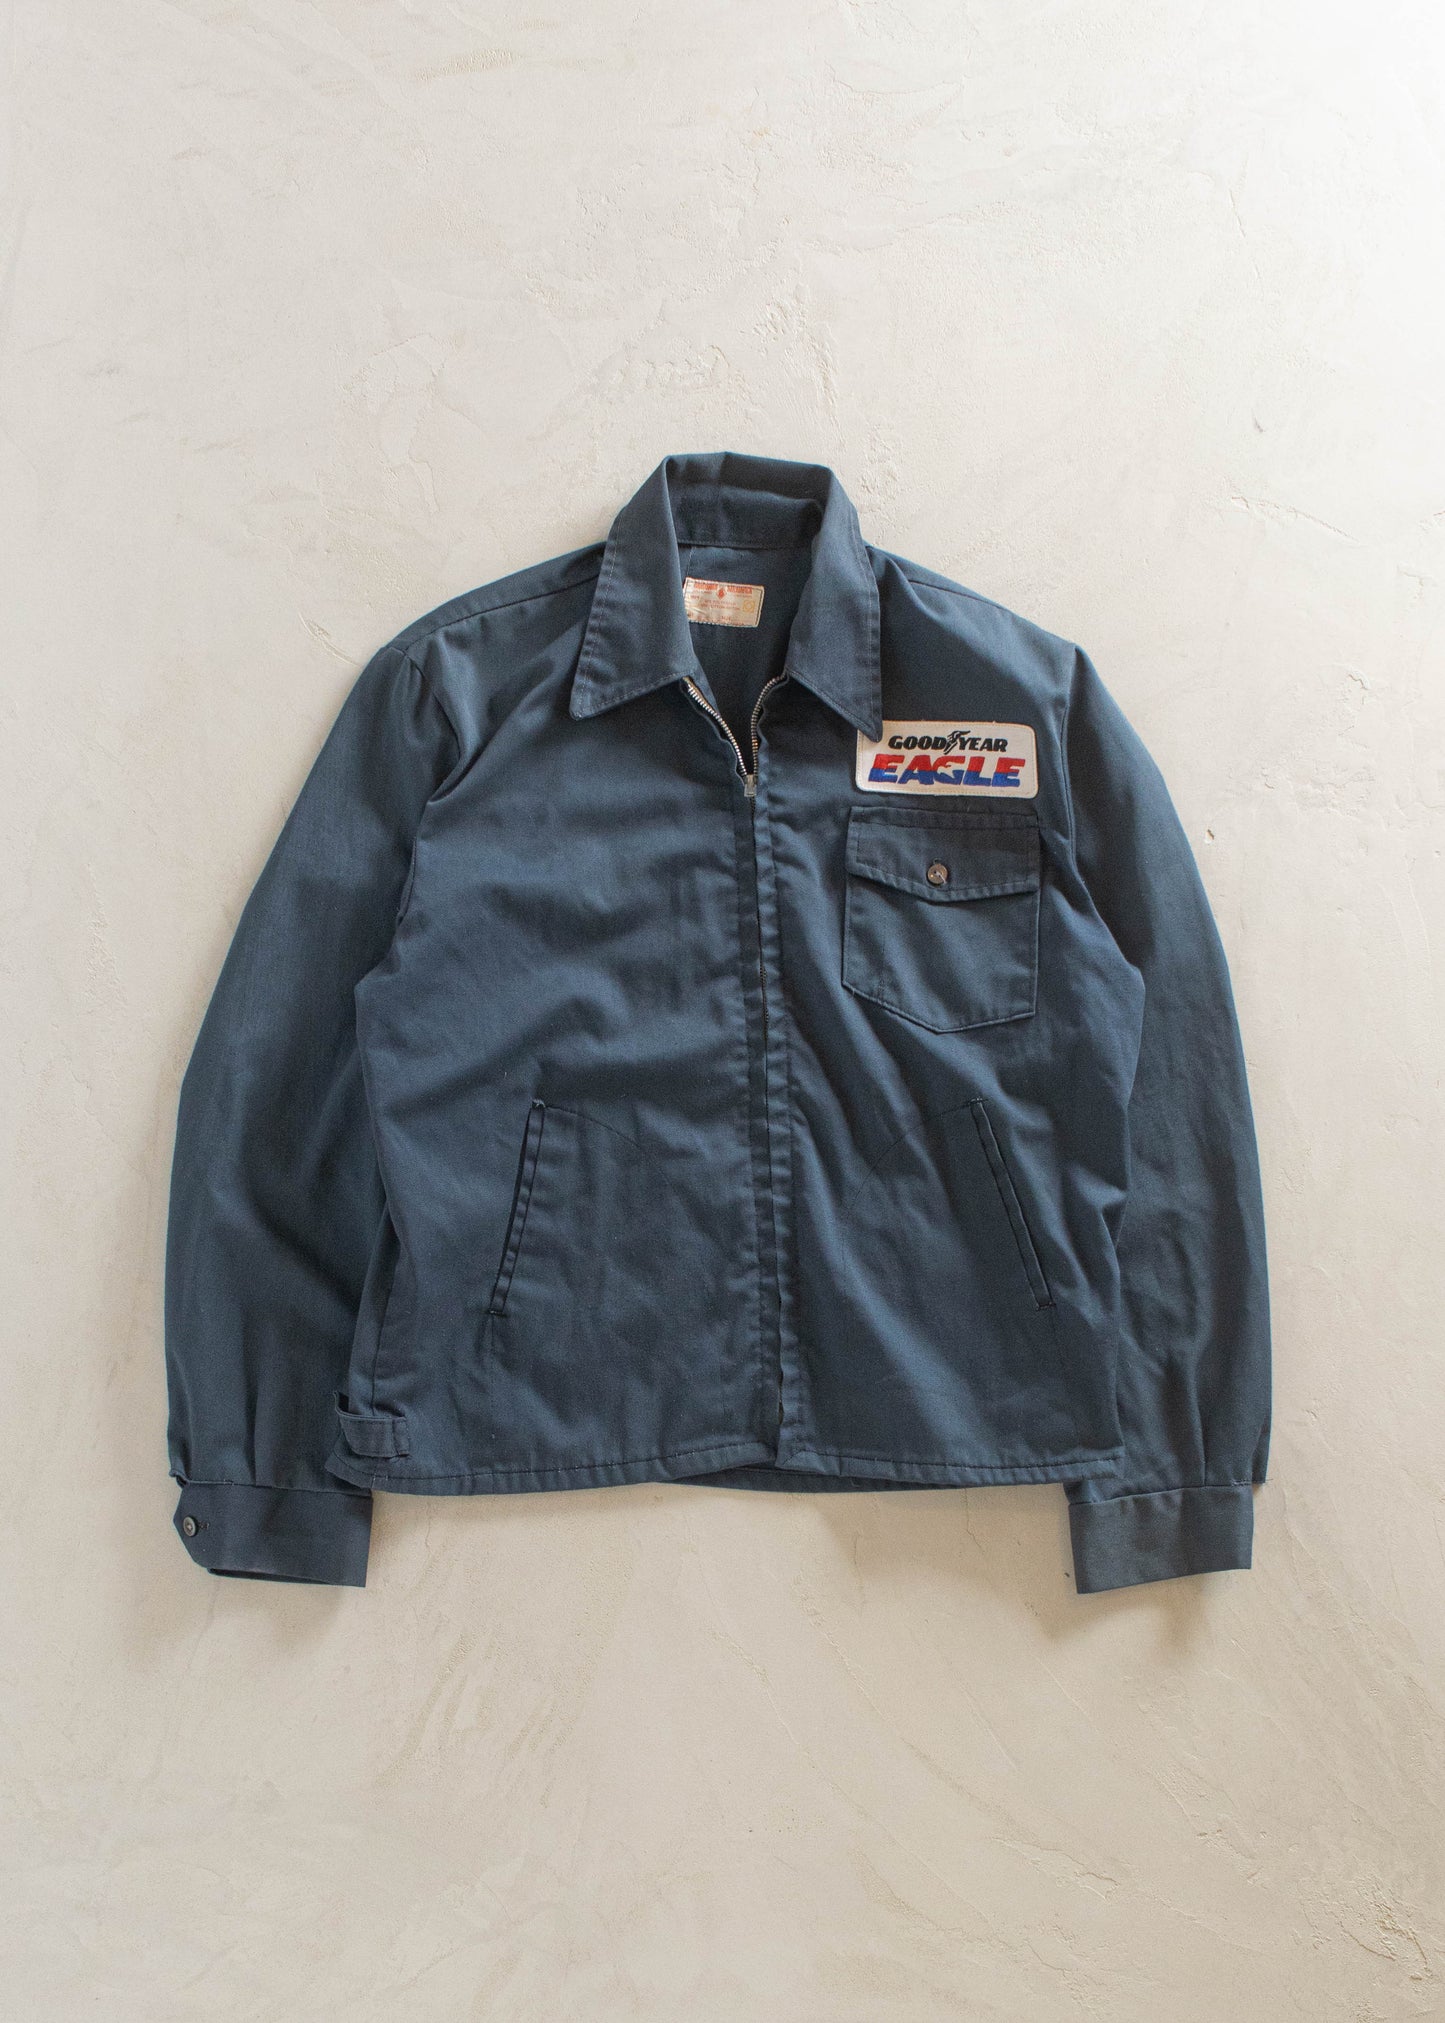 1980s Good Year Eagles Gas Jacket Size M/L